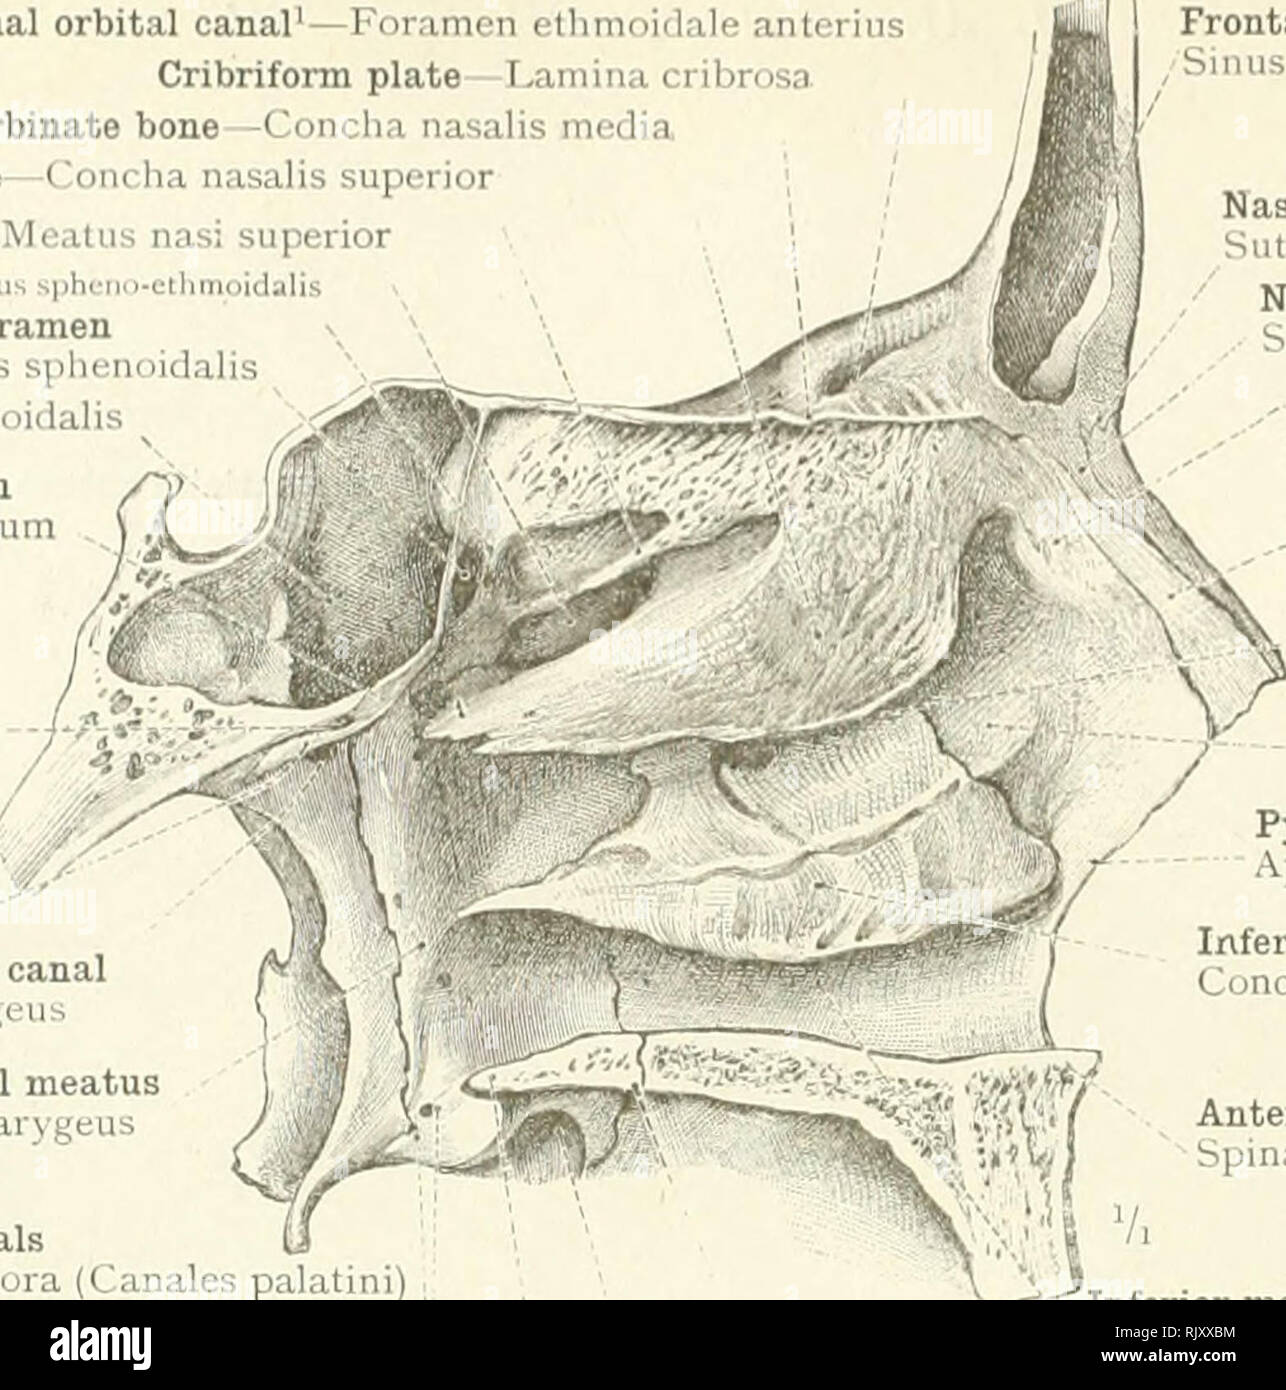 An atlas of human anatomy for students and physicians. Anatomy. 90 THE  SKULL AND THE BONj i OF THE SKULL Anterior internal orbital canal1- Foi  imen i thmoidale anterius Cribriform plate